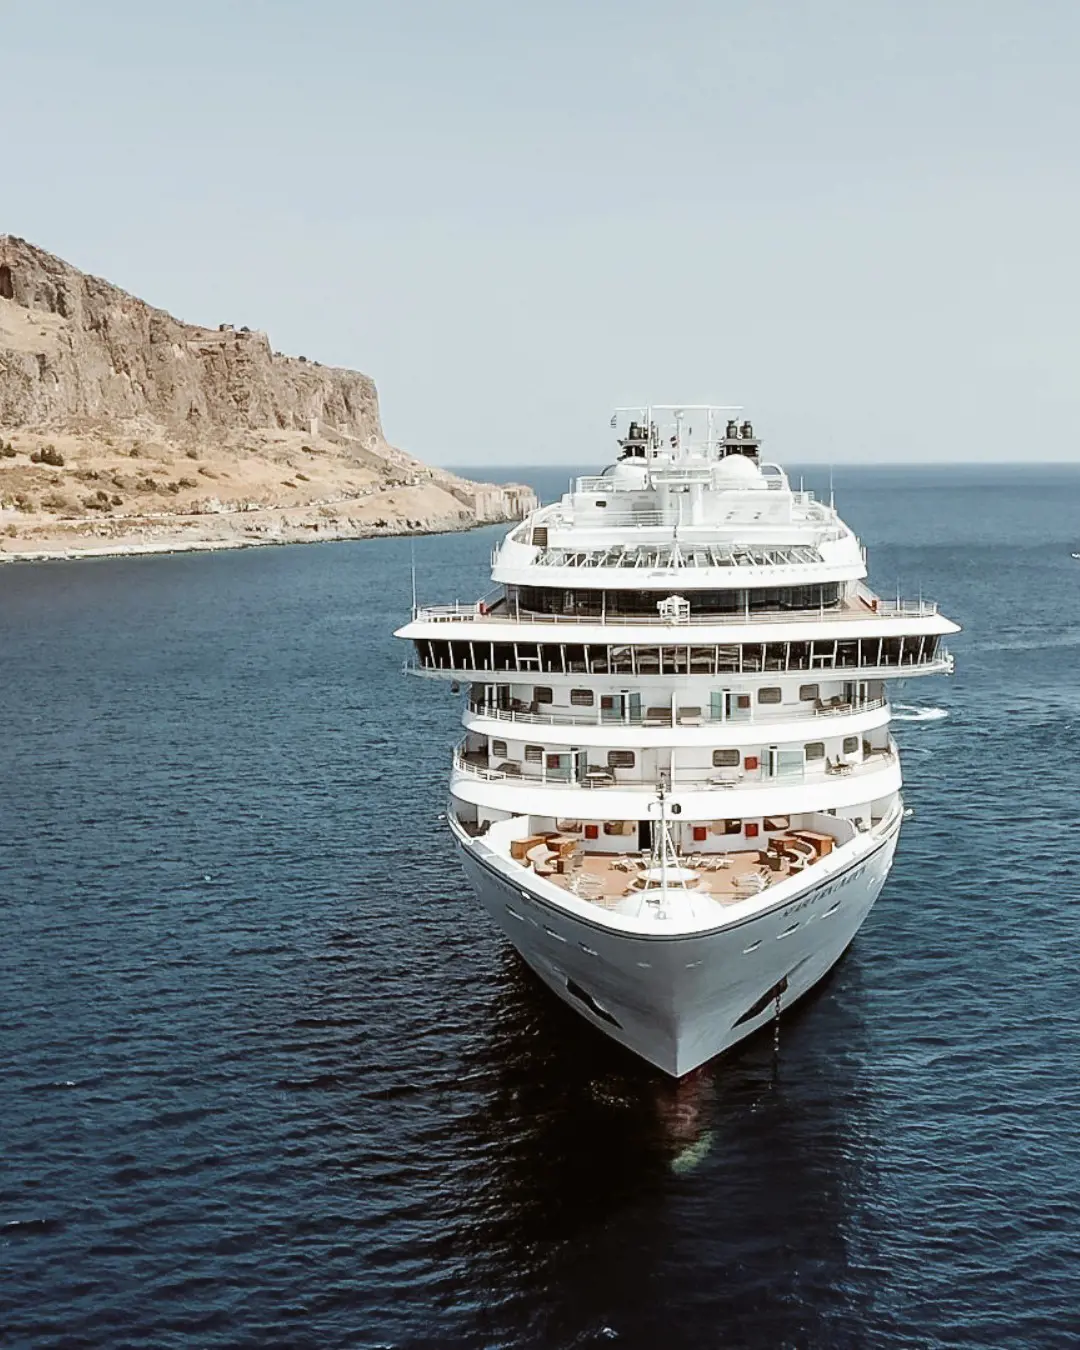 Seabourn Sojourn is a luxury cruise.